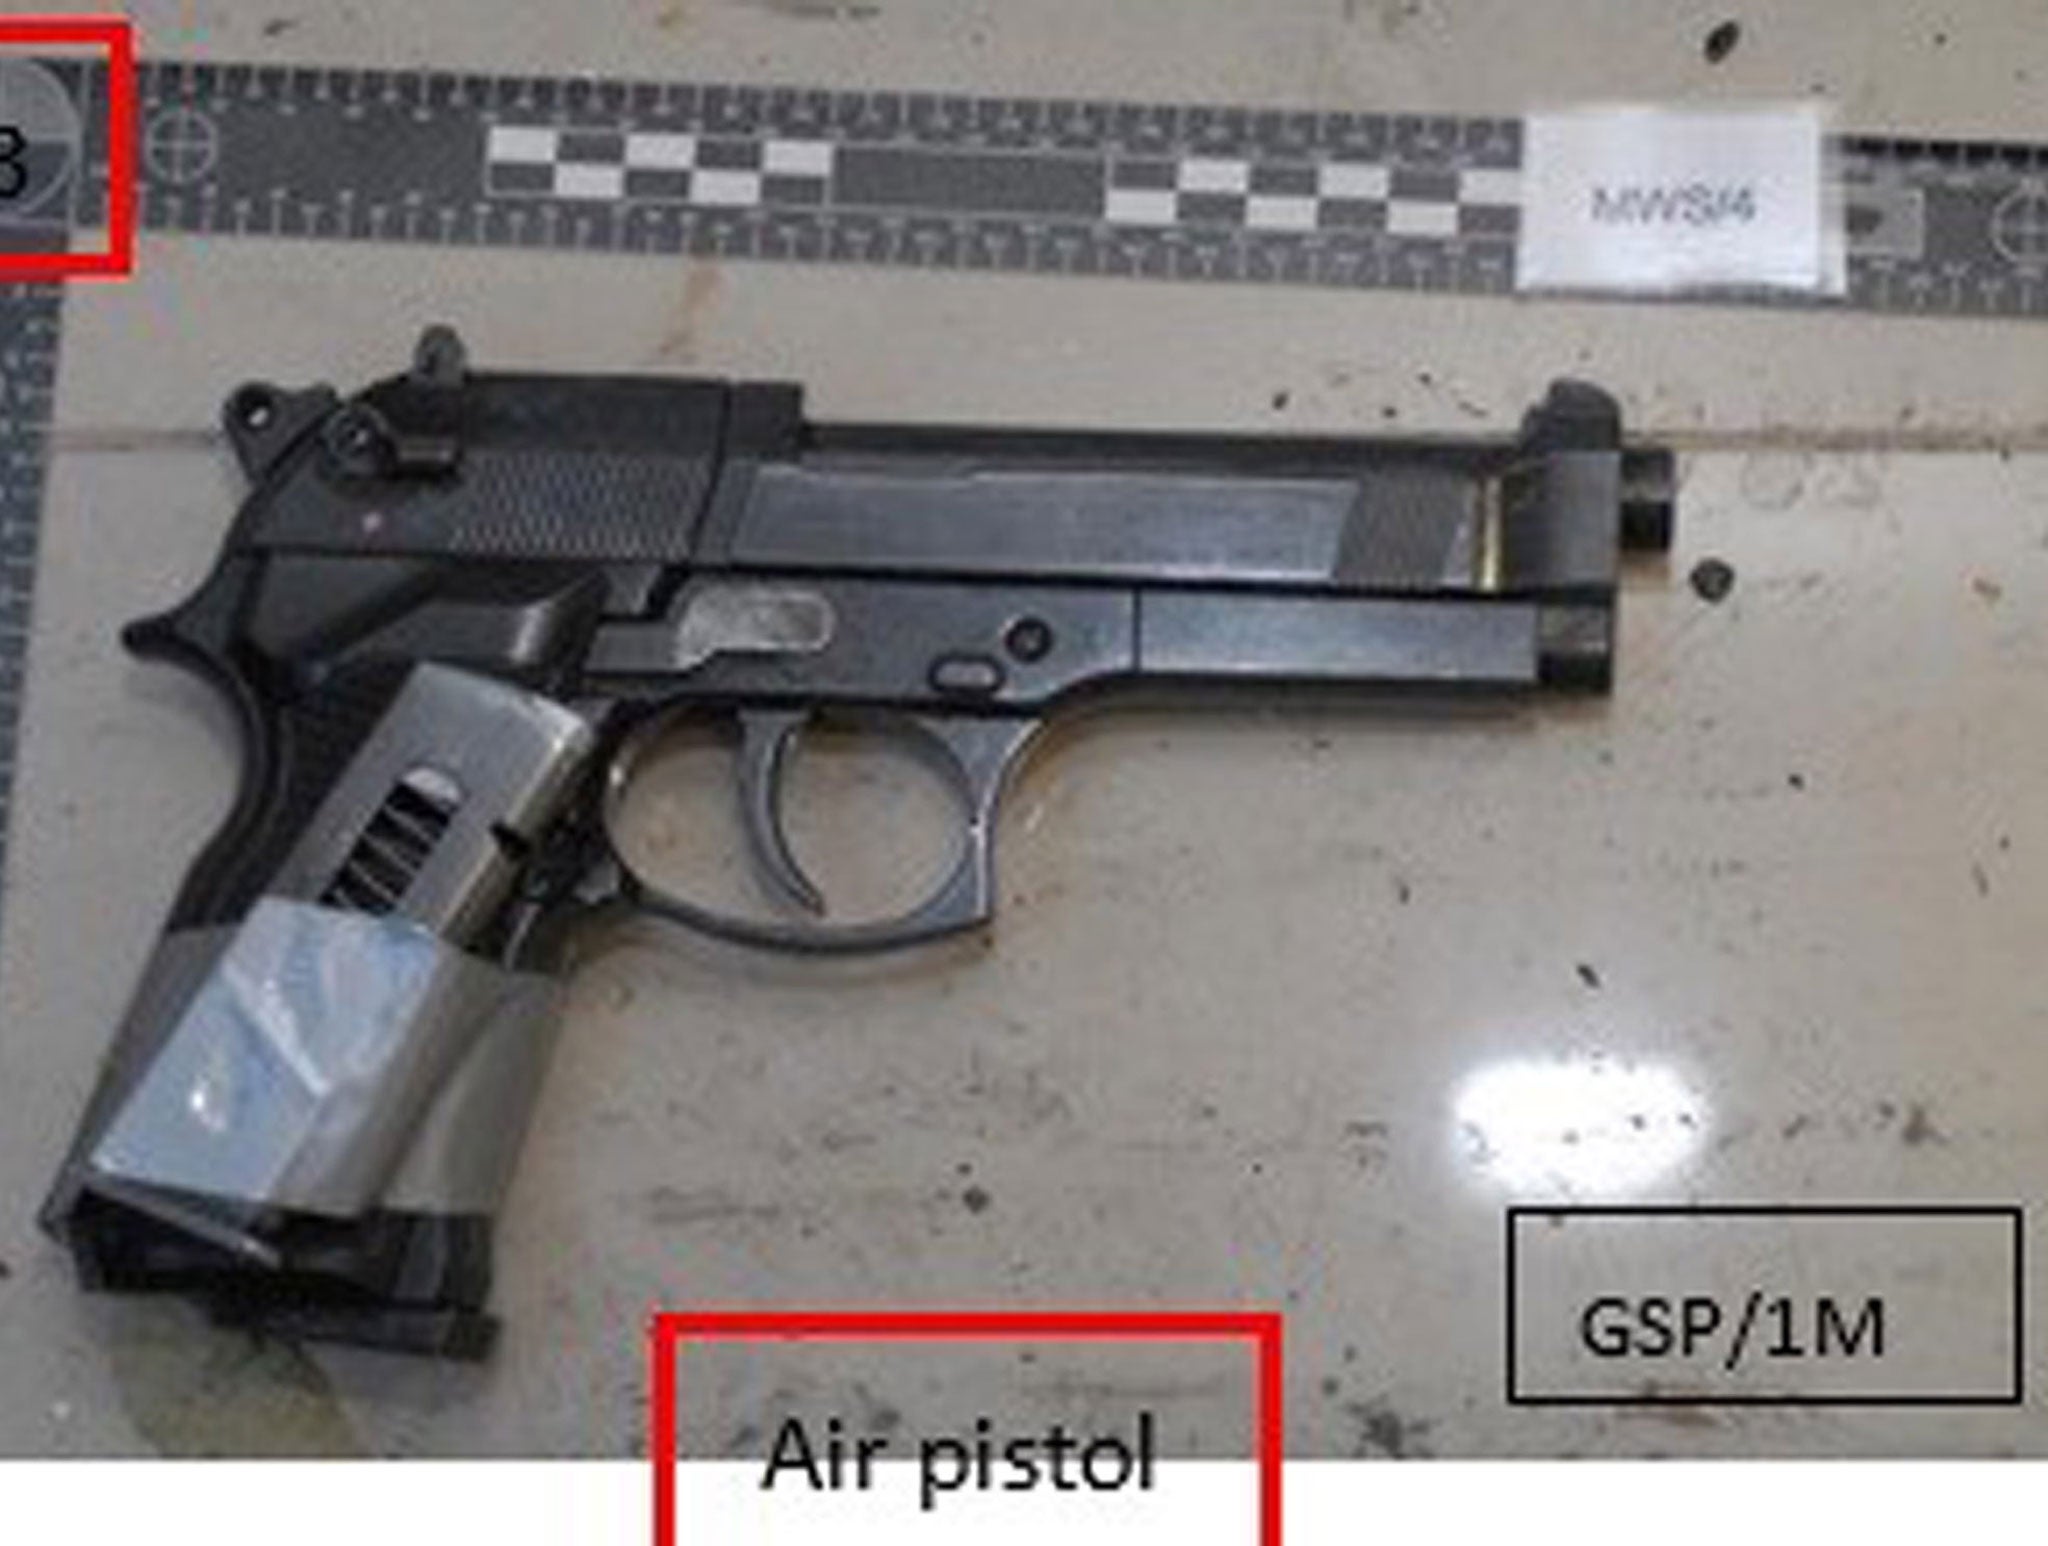 An imitation handgun with an empty magazine strapped to it that was found stashed in Naweed Ali's Seat Leon car